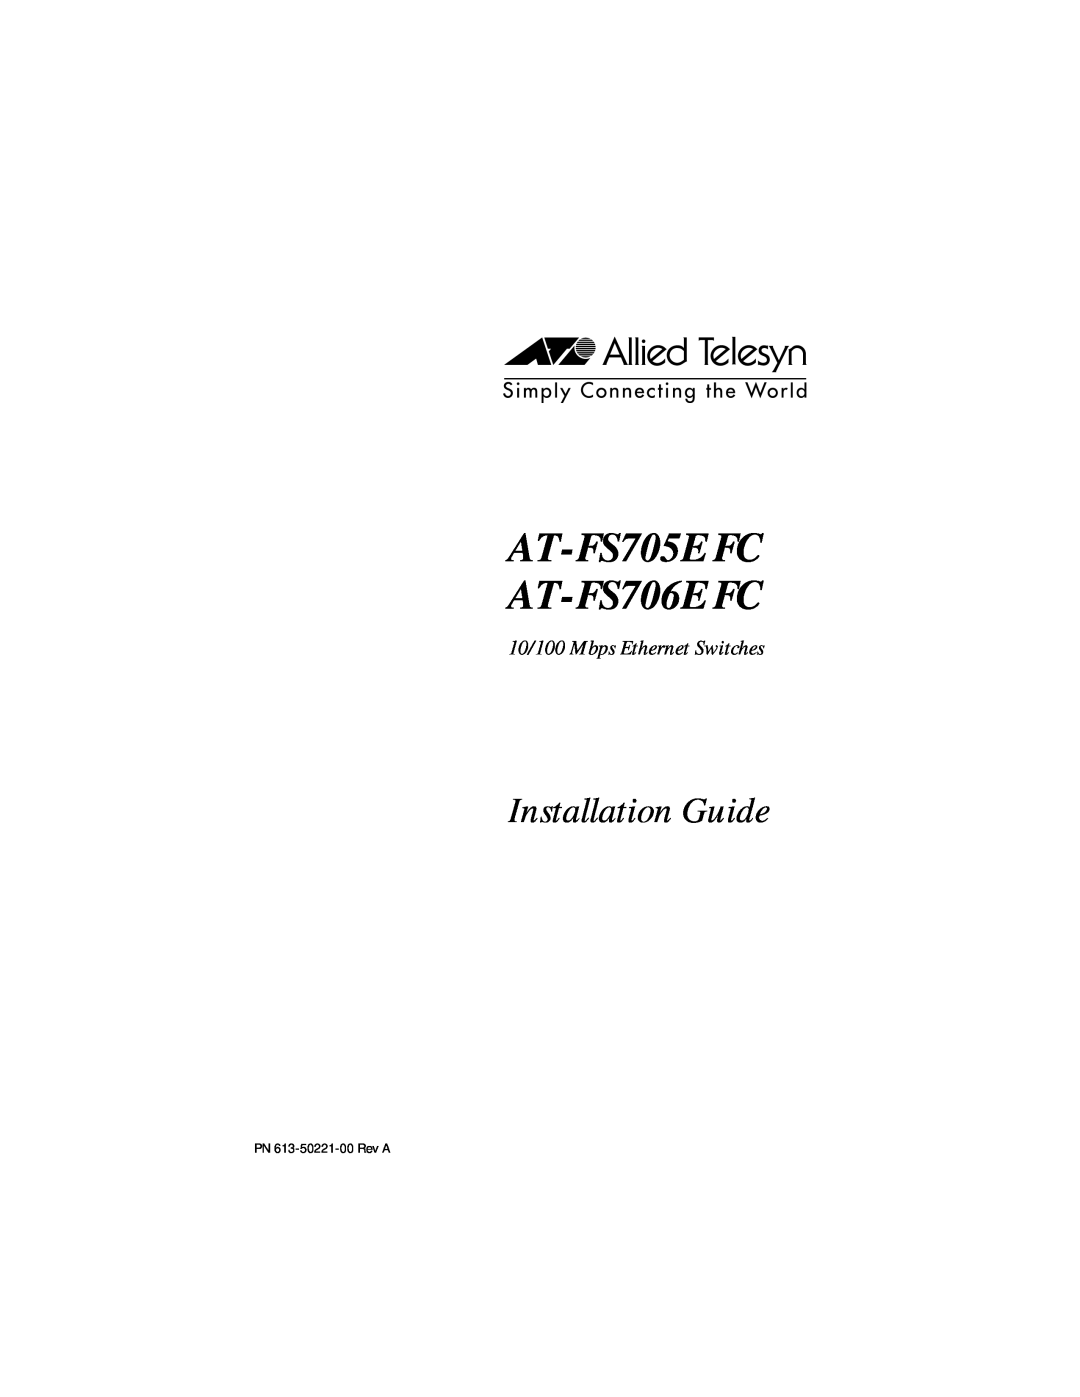 Allied Telesis ATFS705EFCSC60 manual AT-FS705E FC AT-FS706E FC, Installation Guide, 10/100 Mbps Ethernet Switches 